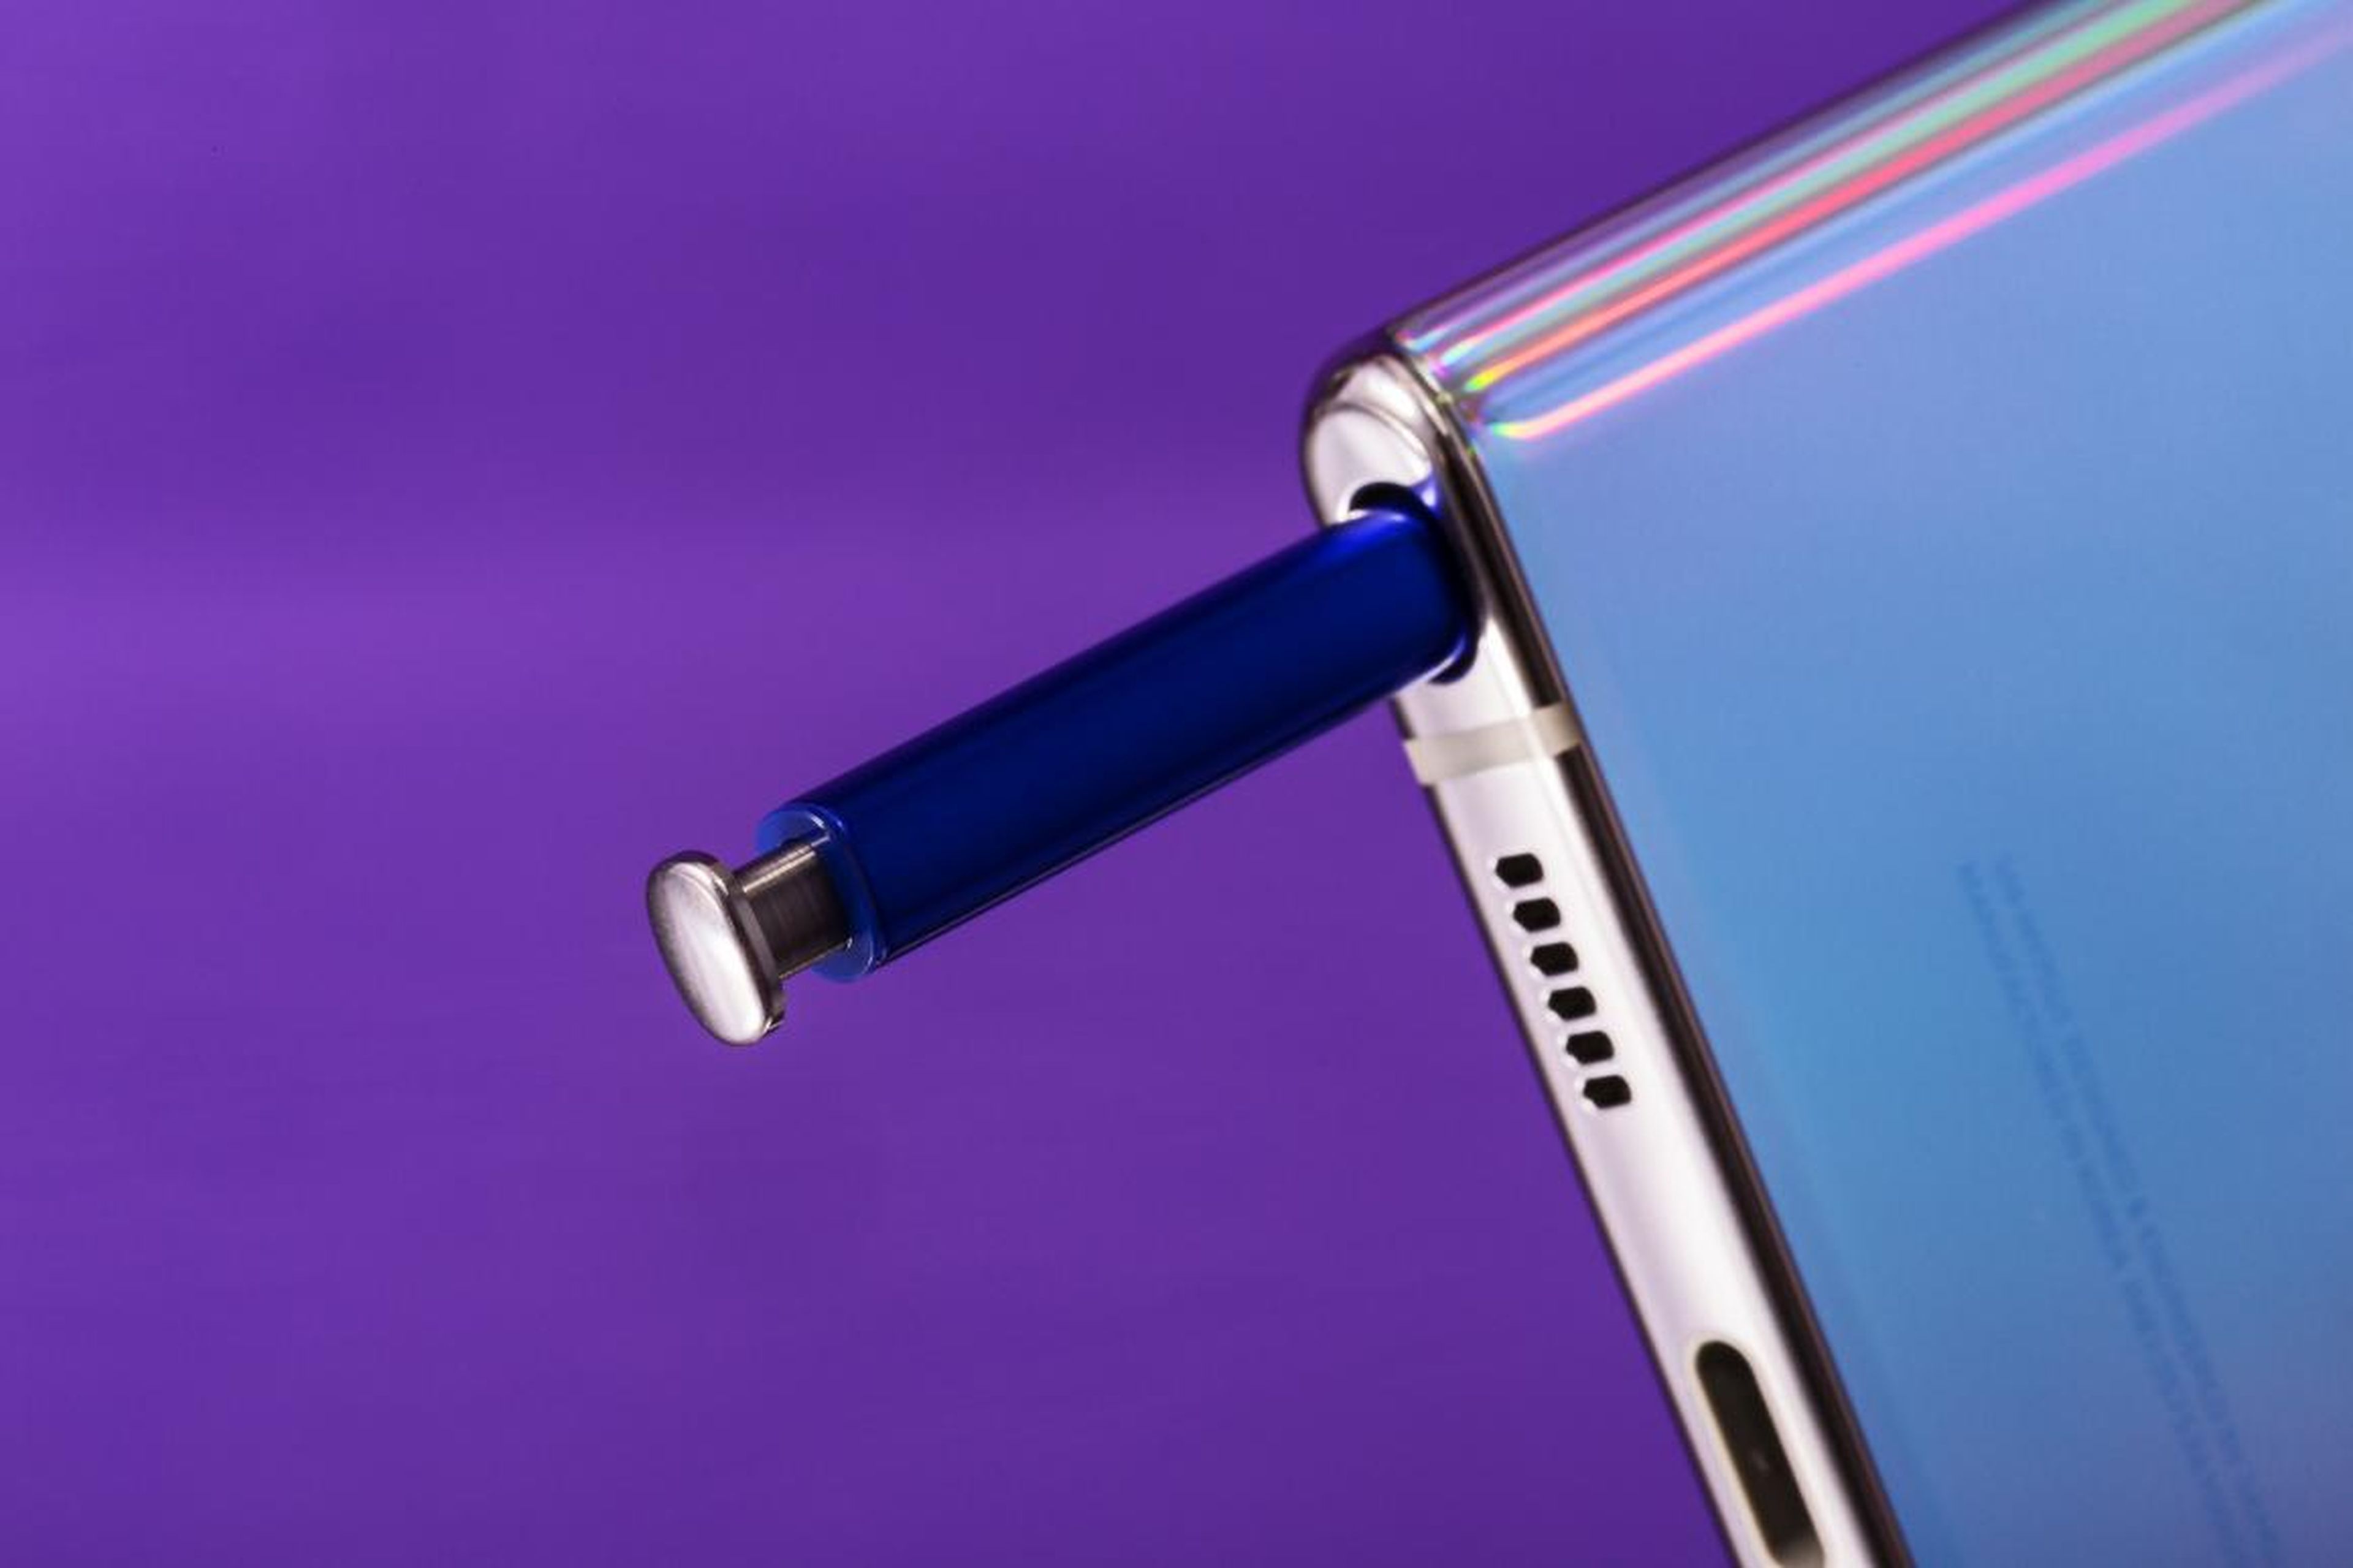 8. The Galaxy S10 doesn't have an S Pen like the Galaxy Note 10 — but you don't need a stylus.